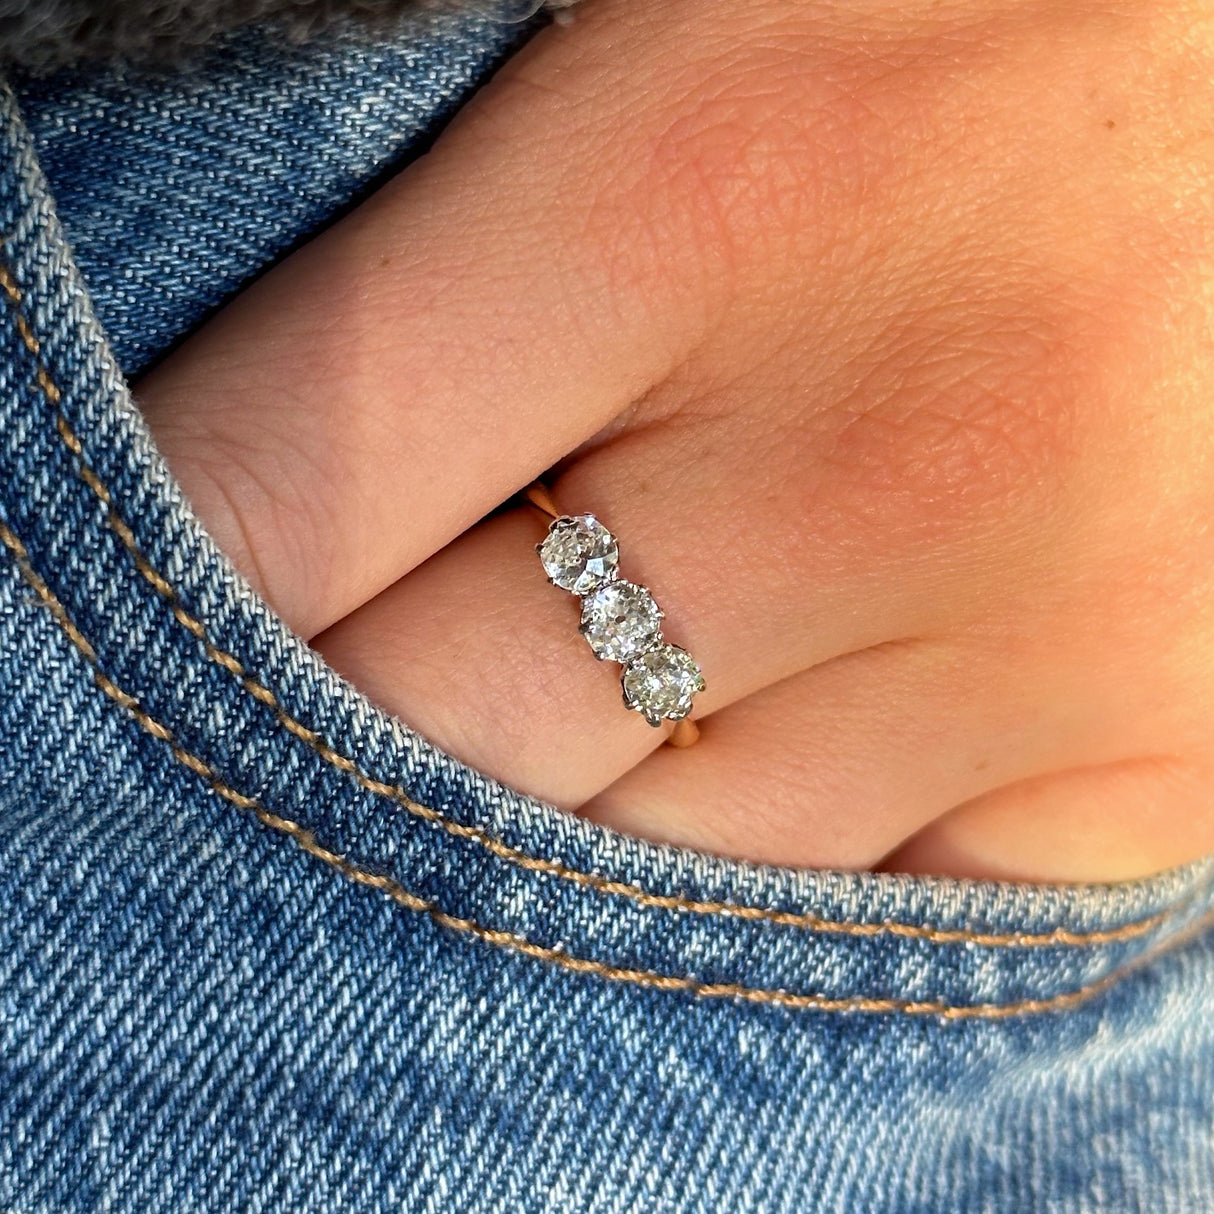 antique three stone diamond engagement ring, 18ct yellow gold band, worn on hand and placed in pocket of jeans, front view. 